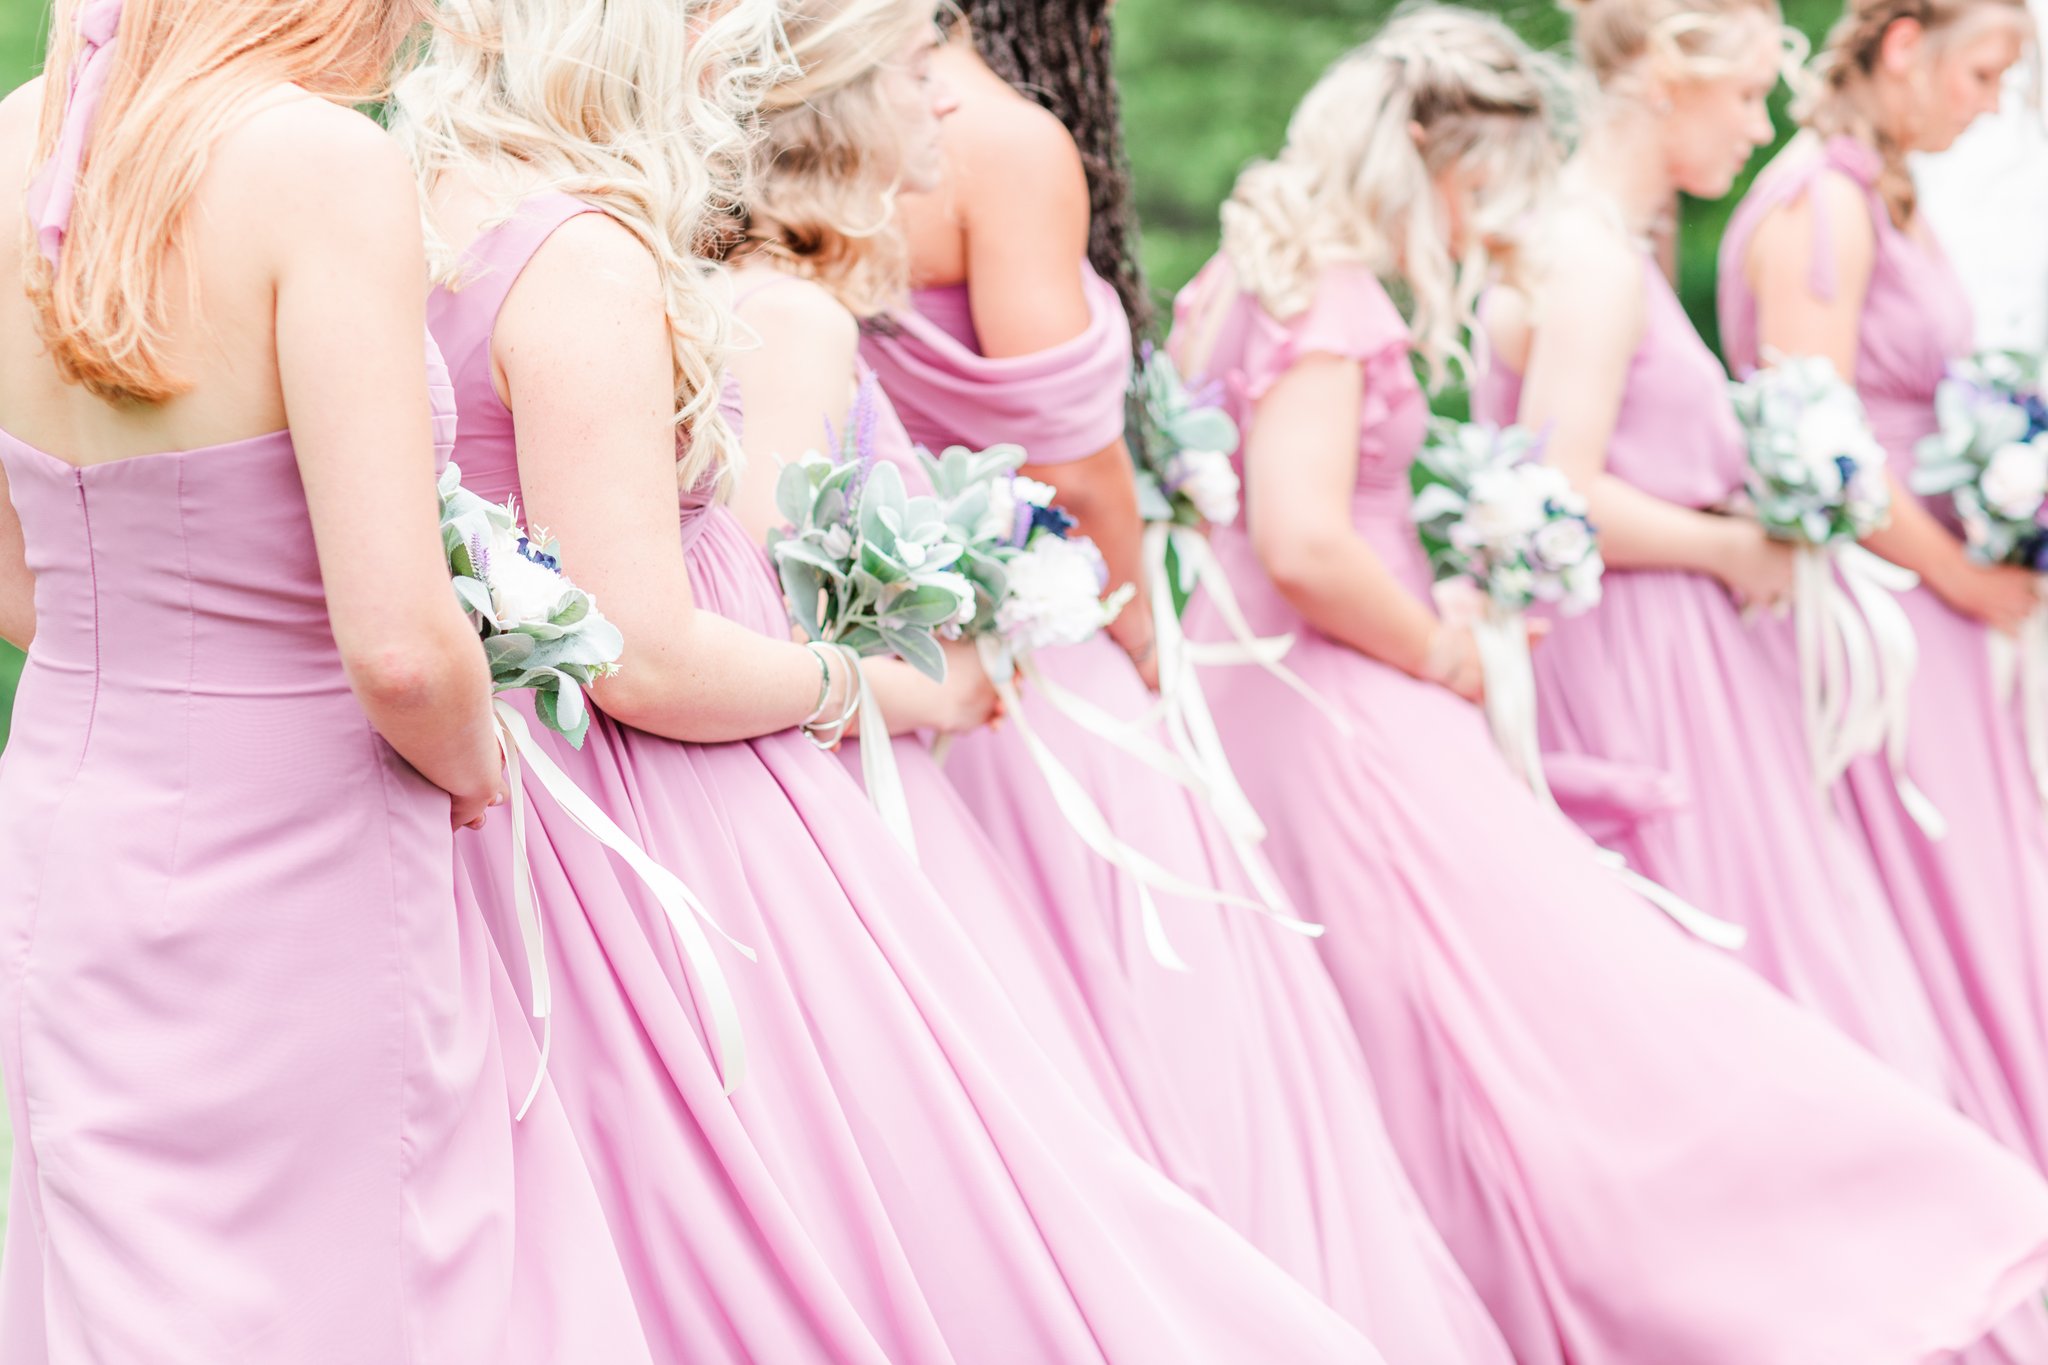 Bridesmaids lined up during wedding ceremony wearing wisteria bridesmaid dresses from JJ's house